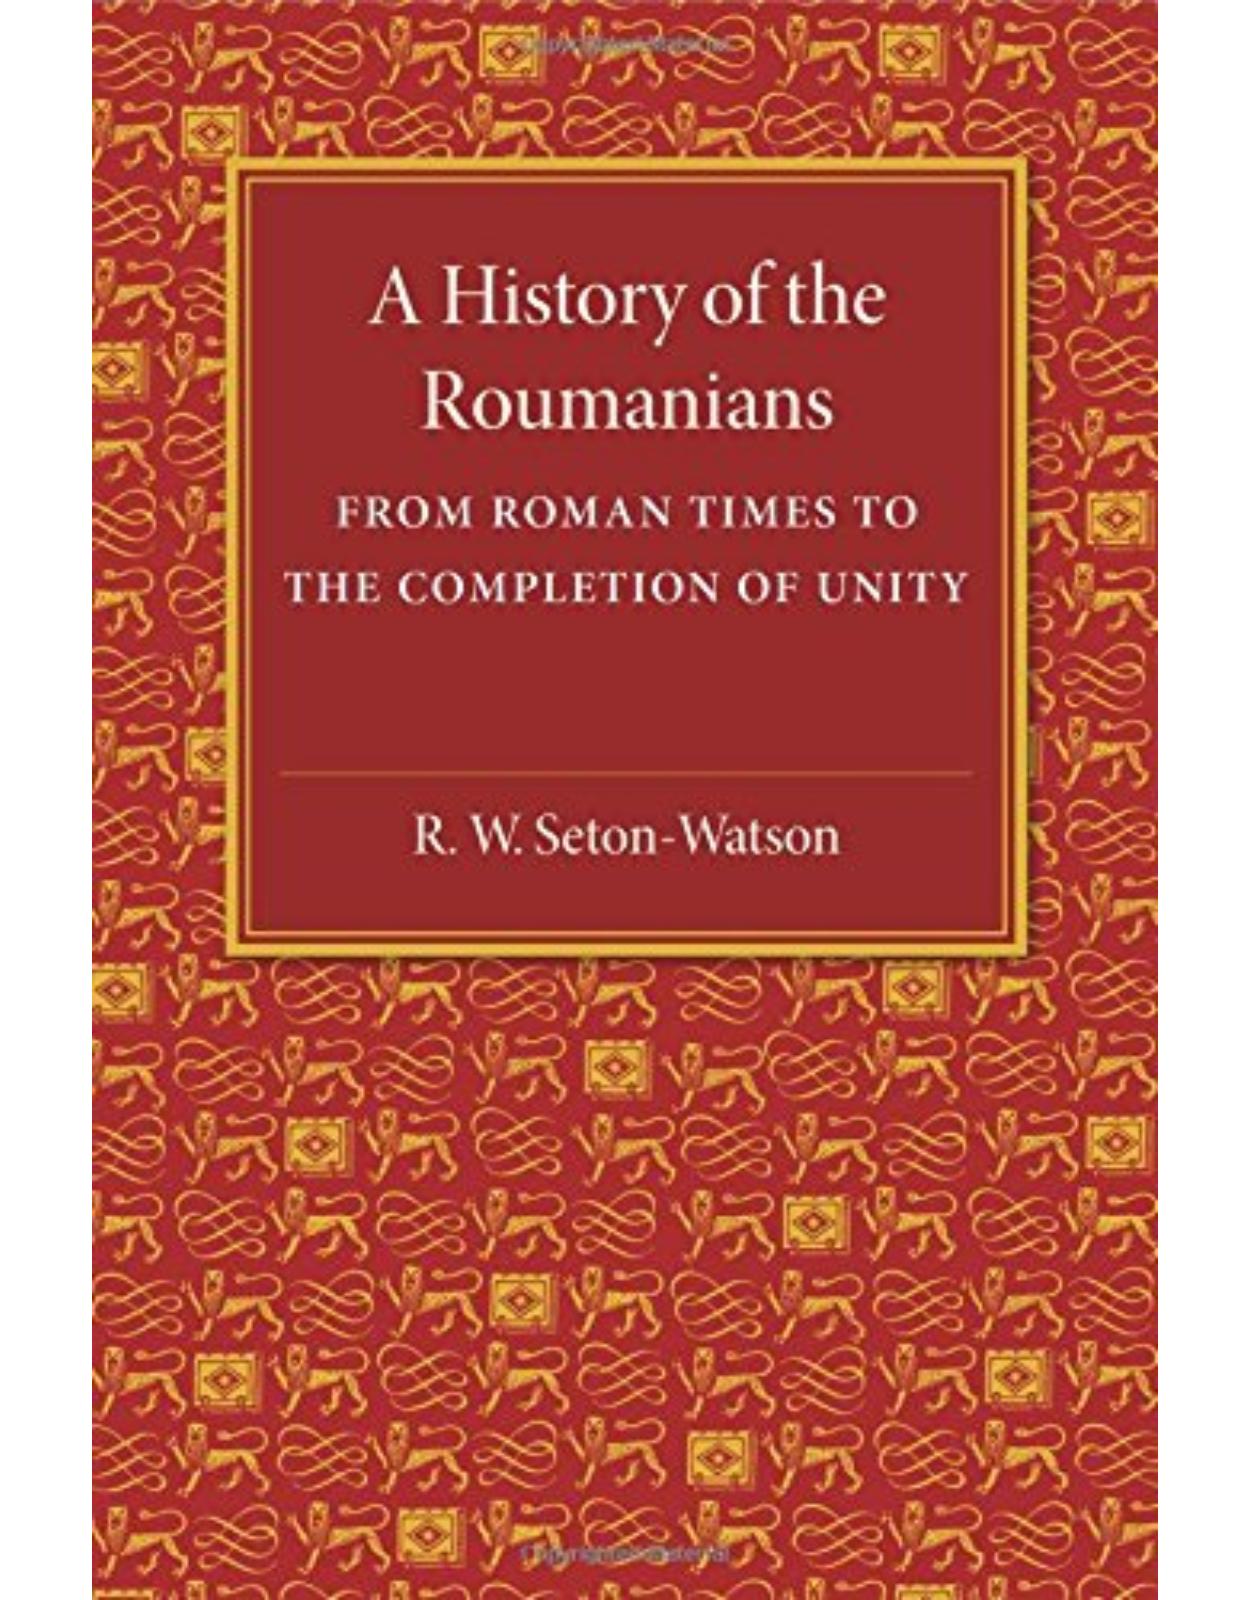 A History of the Roumanians: From Roman Times to the Completion of Unity